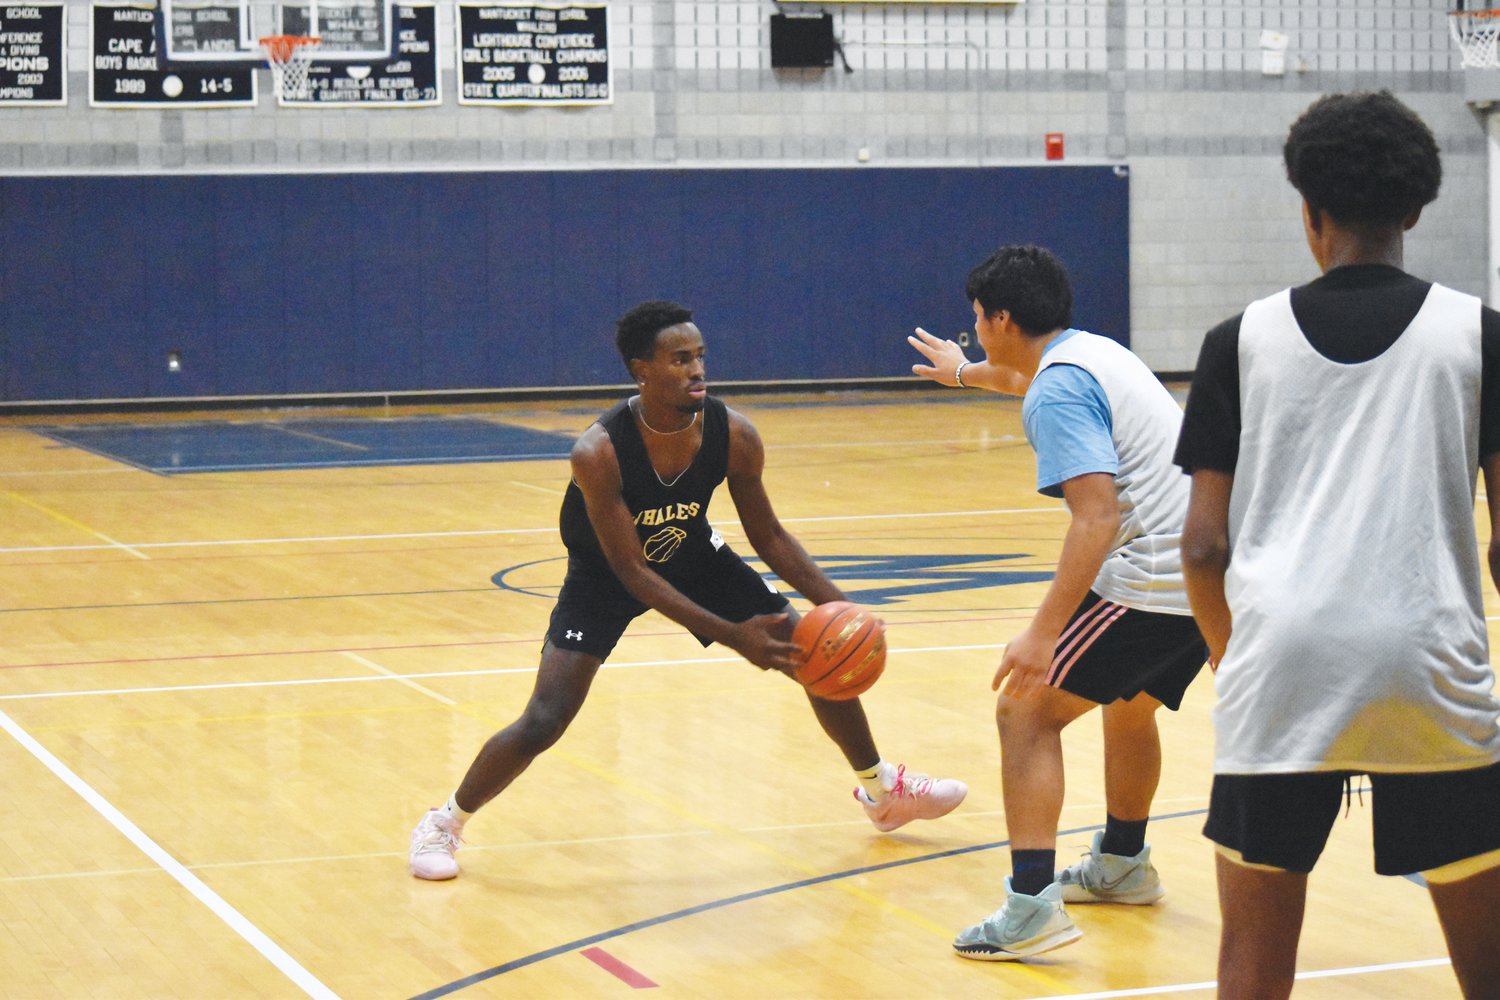 Jayquan Francis (left) is expected to be a key member of the Whalers’ offensive attack this season.